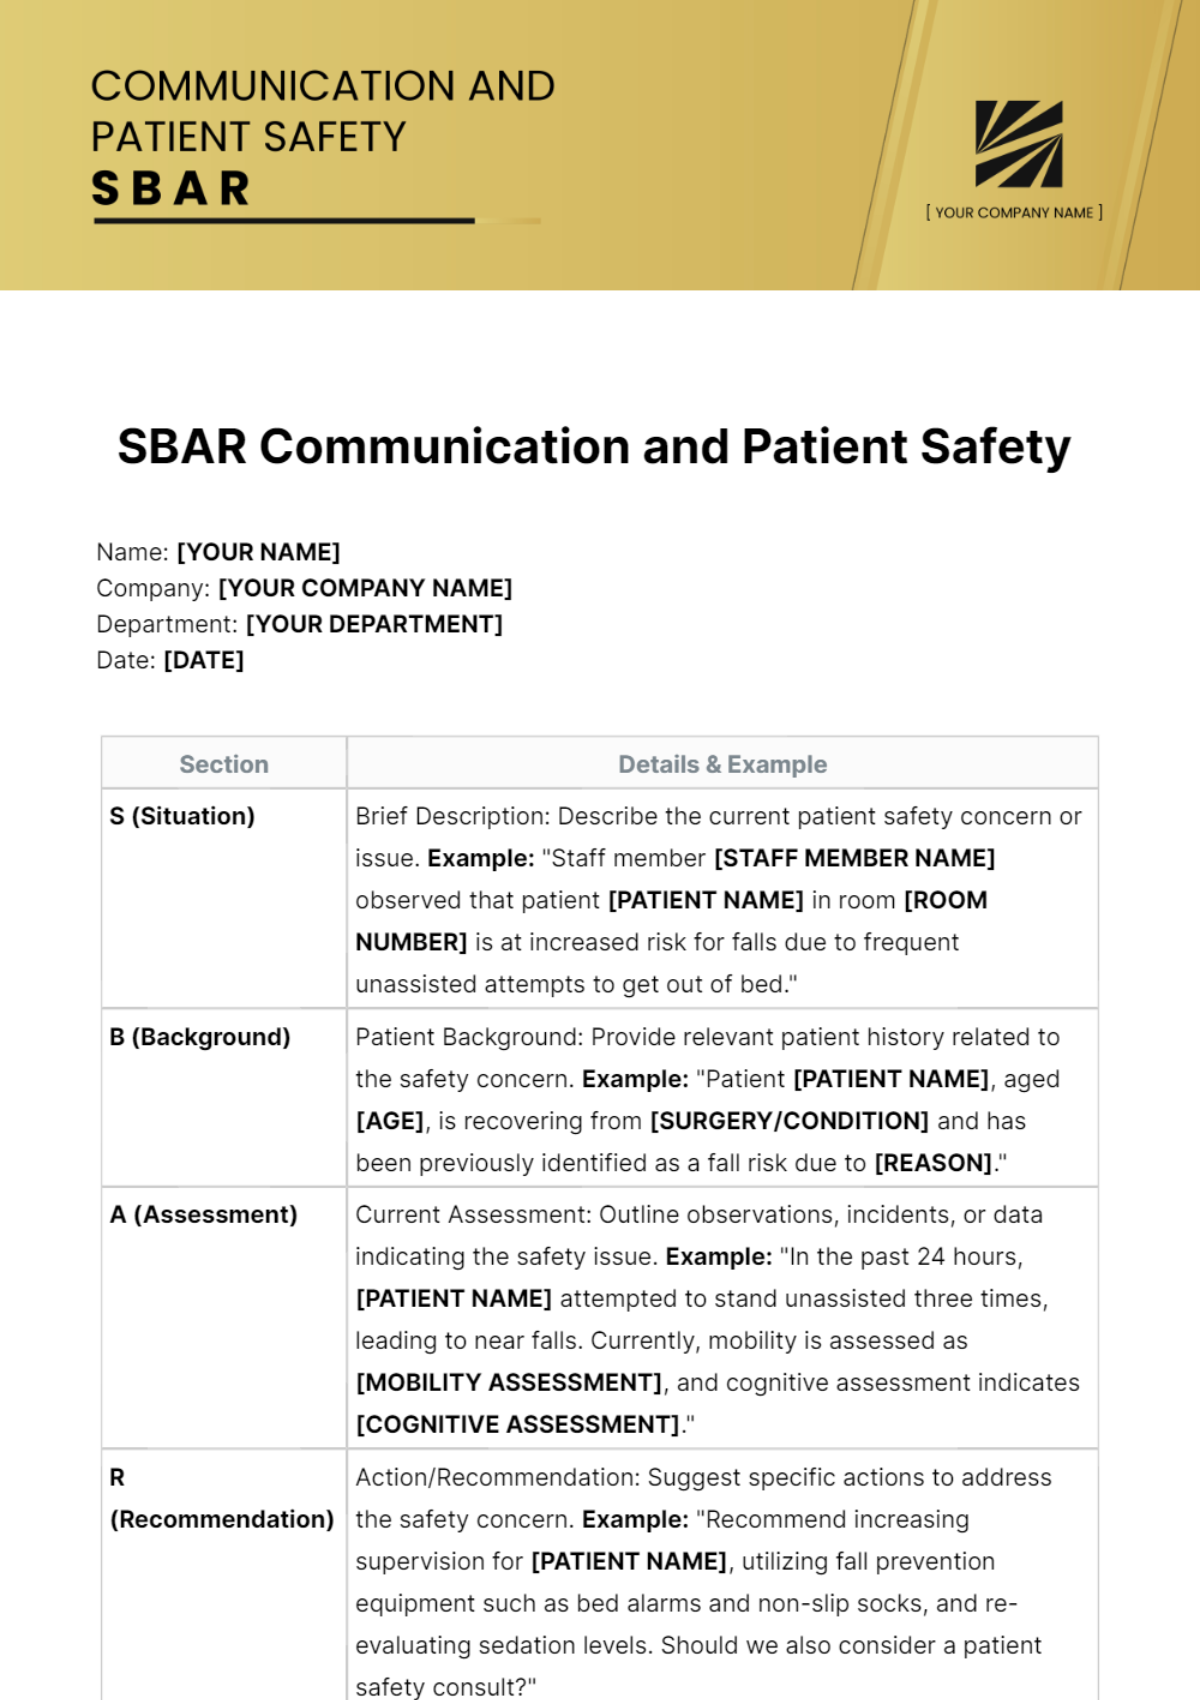 SBAR Communication and Patient Safety Template